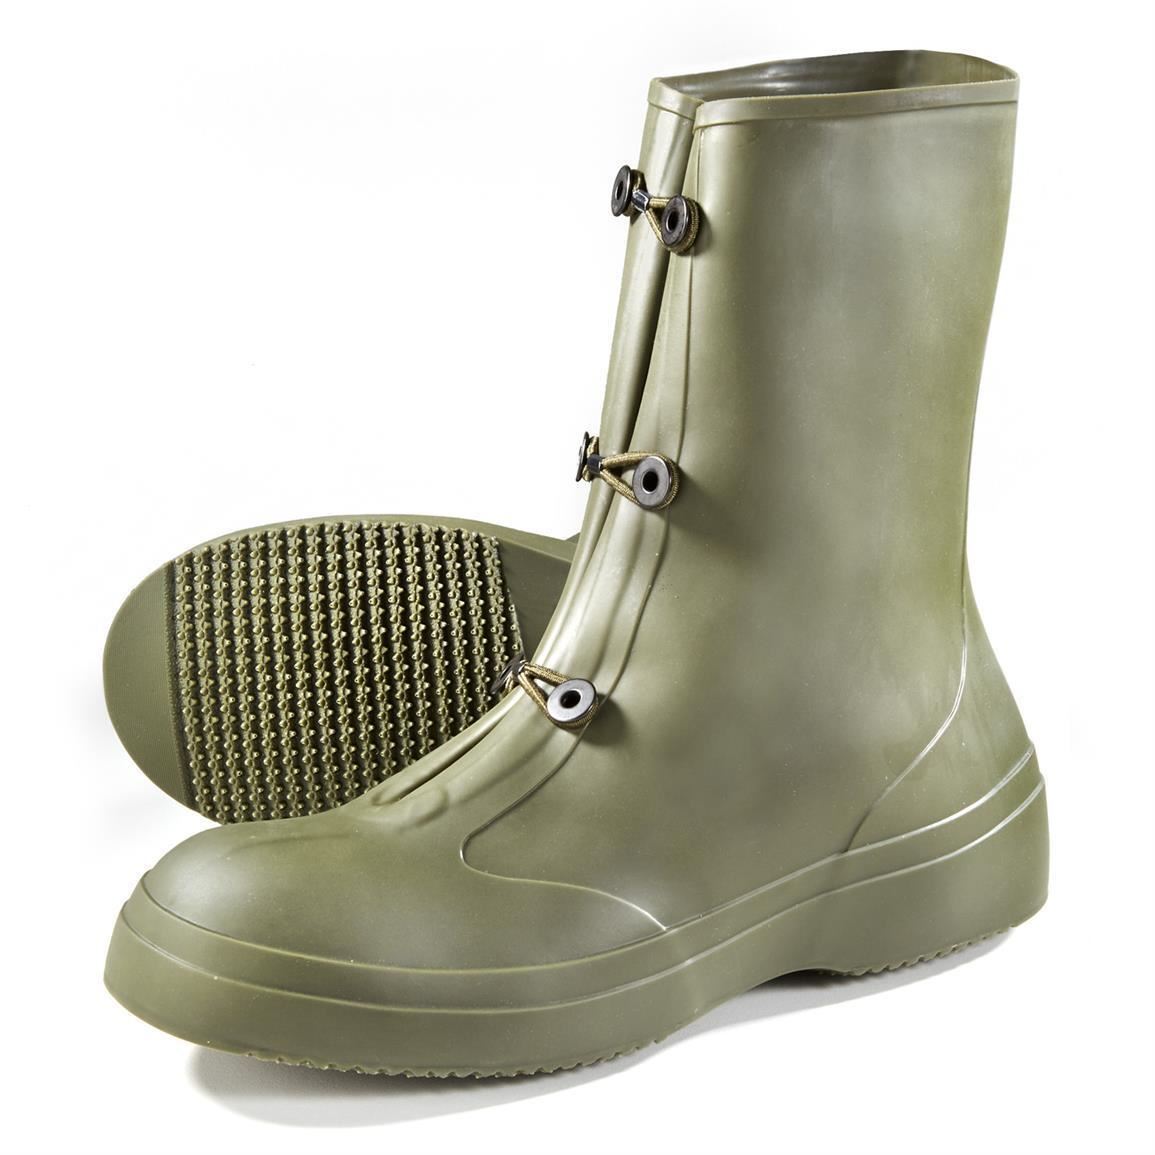 US Military Weatherproof Rubber Boots OD Green - 11